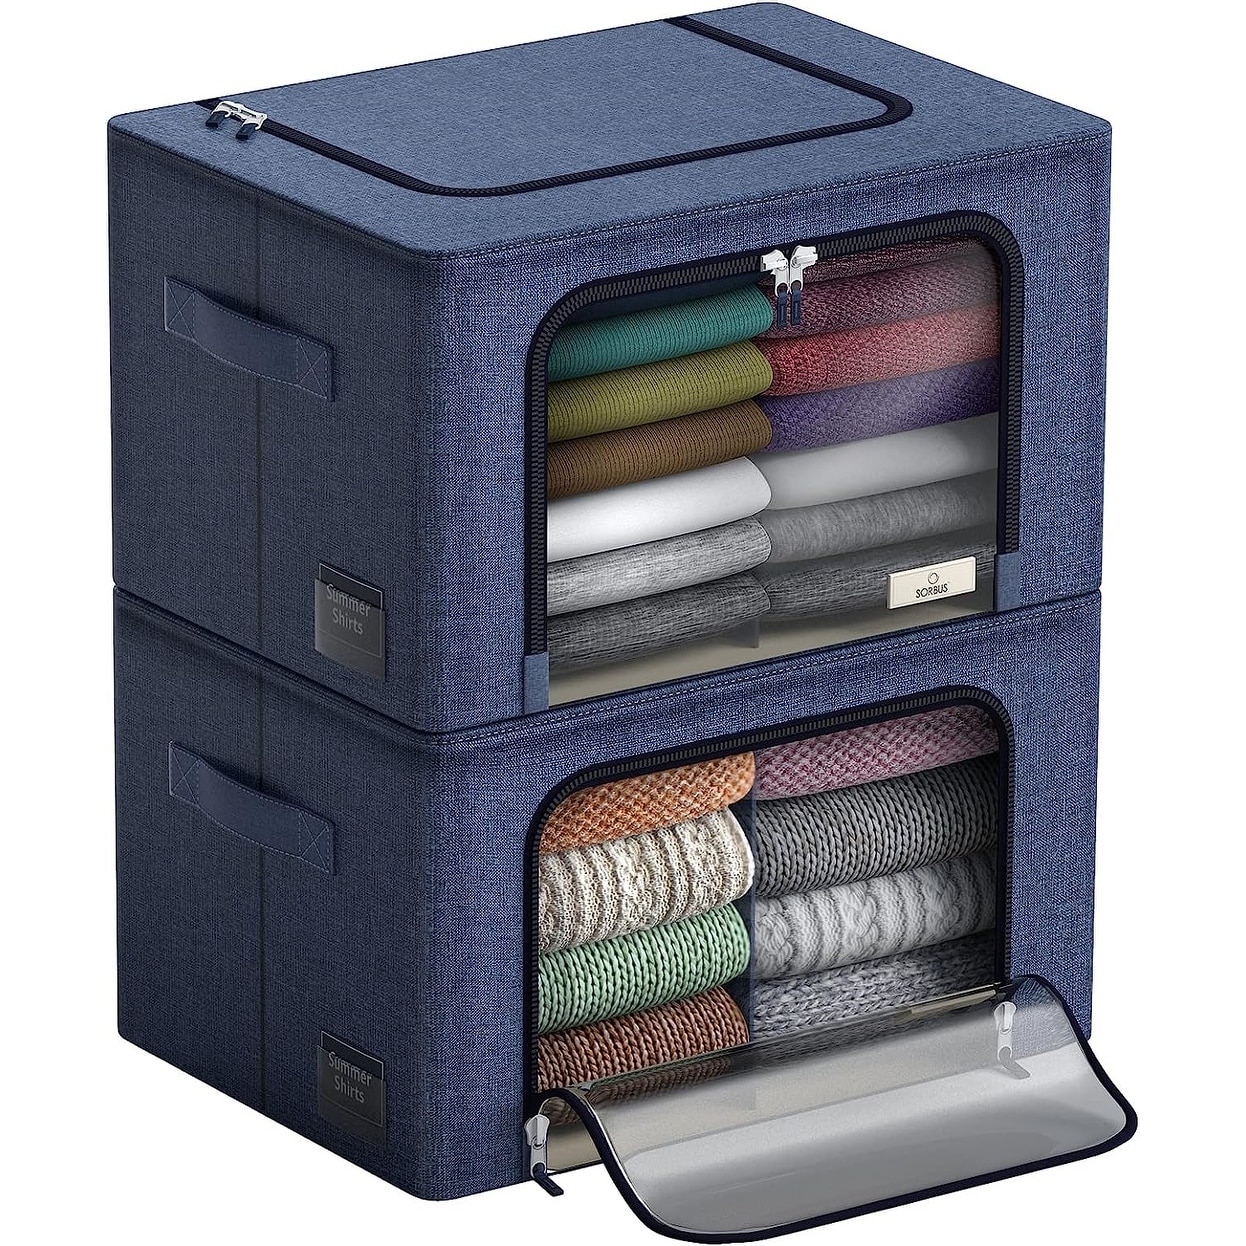 https://ak1.ostkcdn.com/images/products/is/images/direct/7c6b35156deff1c5104eff766e4a0087955e9f64/Storage-Bins%2C-Foldable-Stackable-Container-Organizer-Set-with-Large-Window-%26-Carry-Handles.jpg